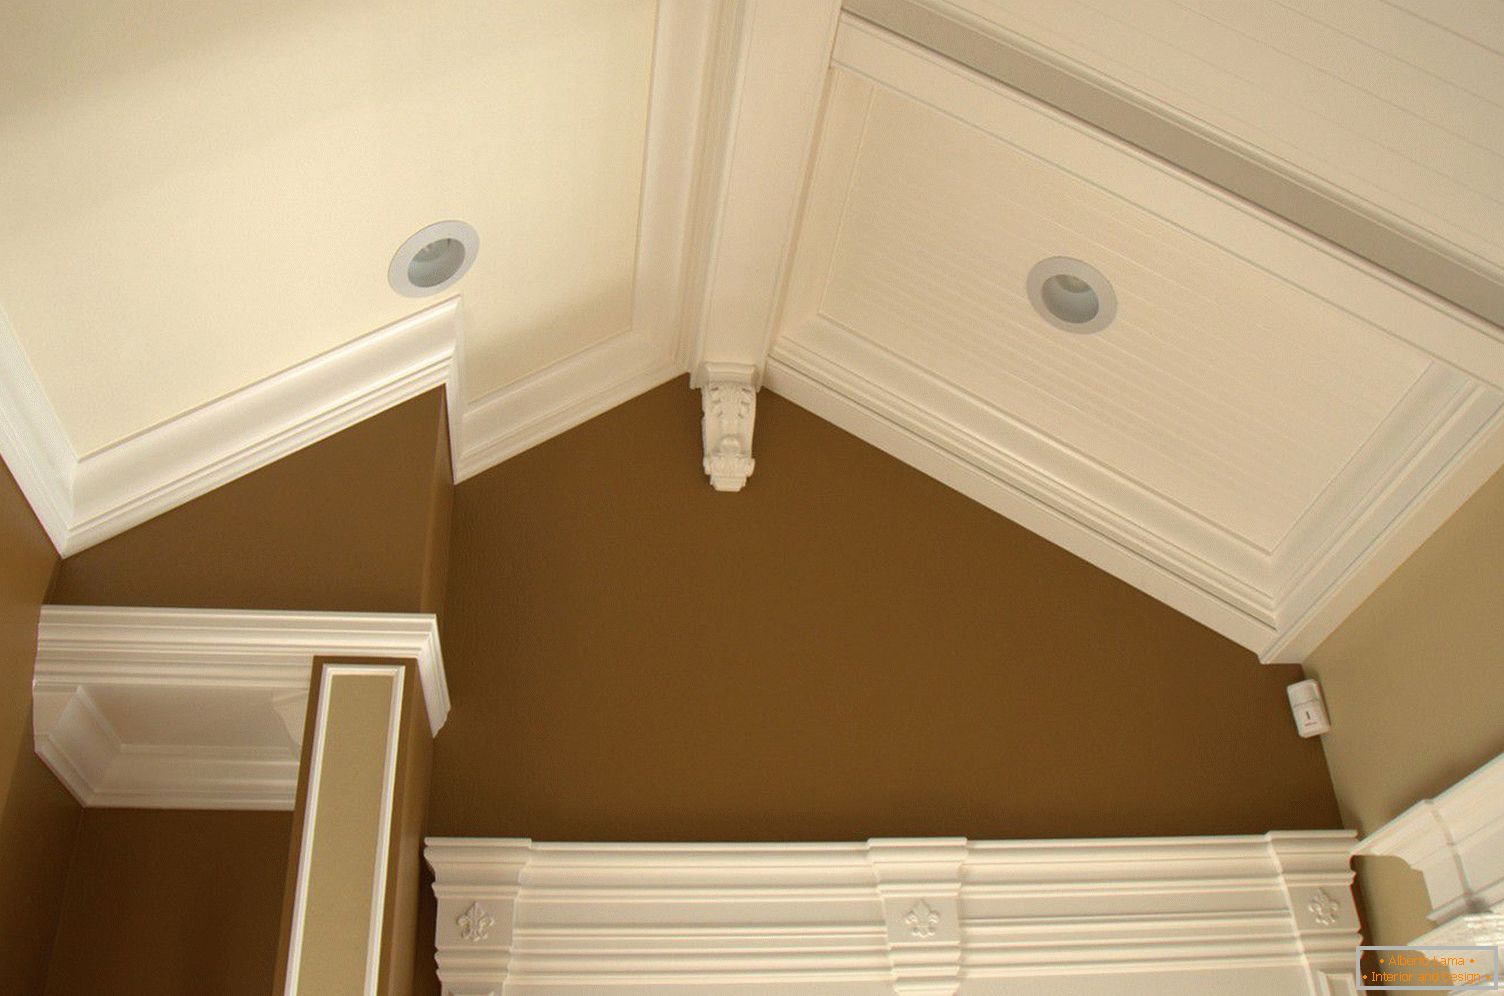 Moldings and moldings